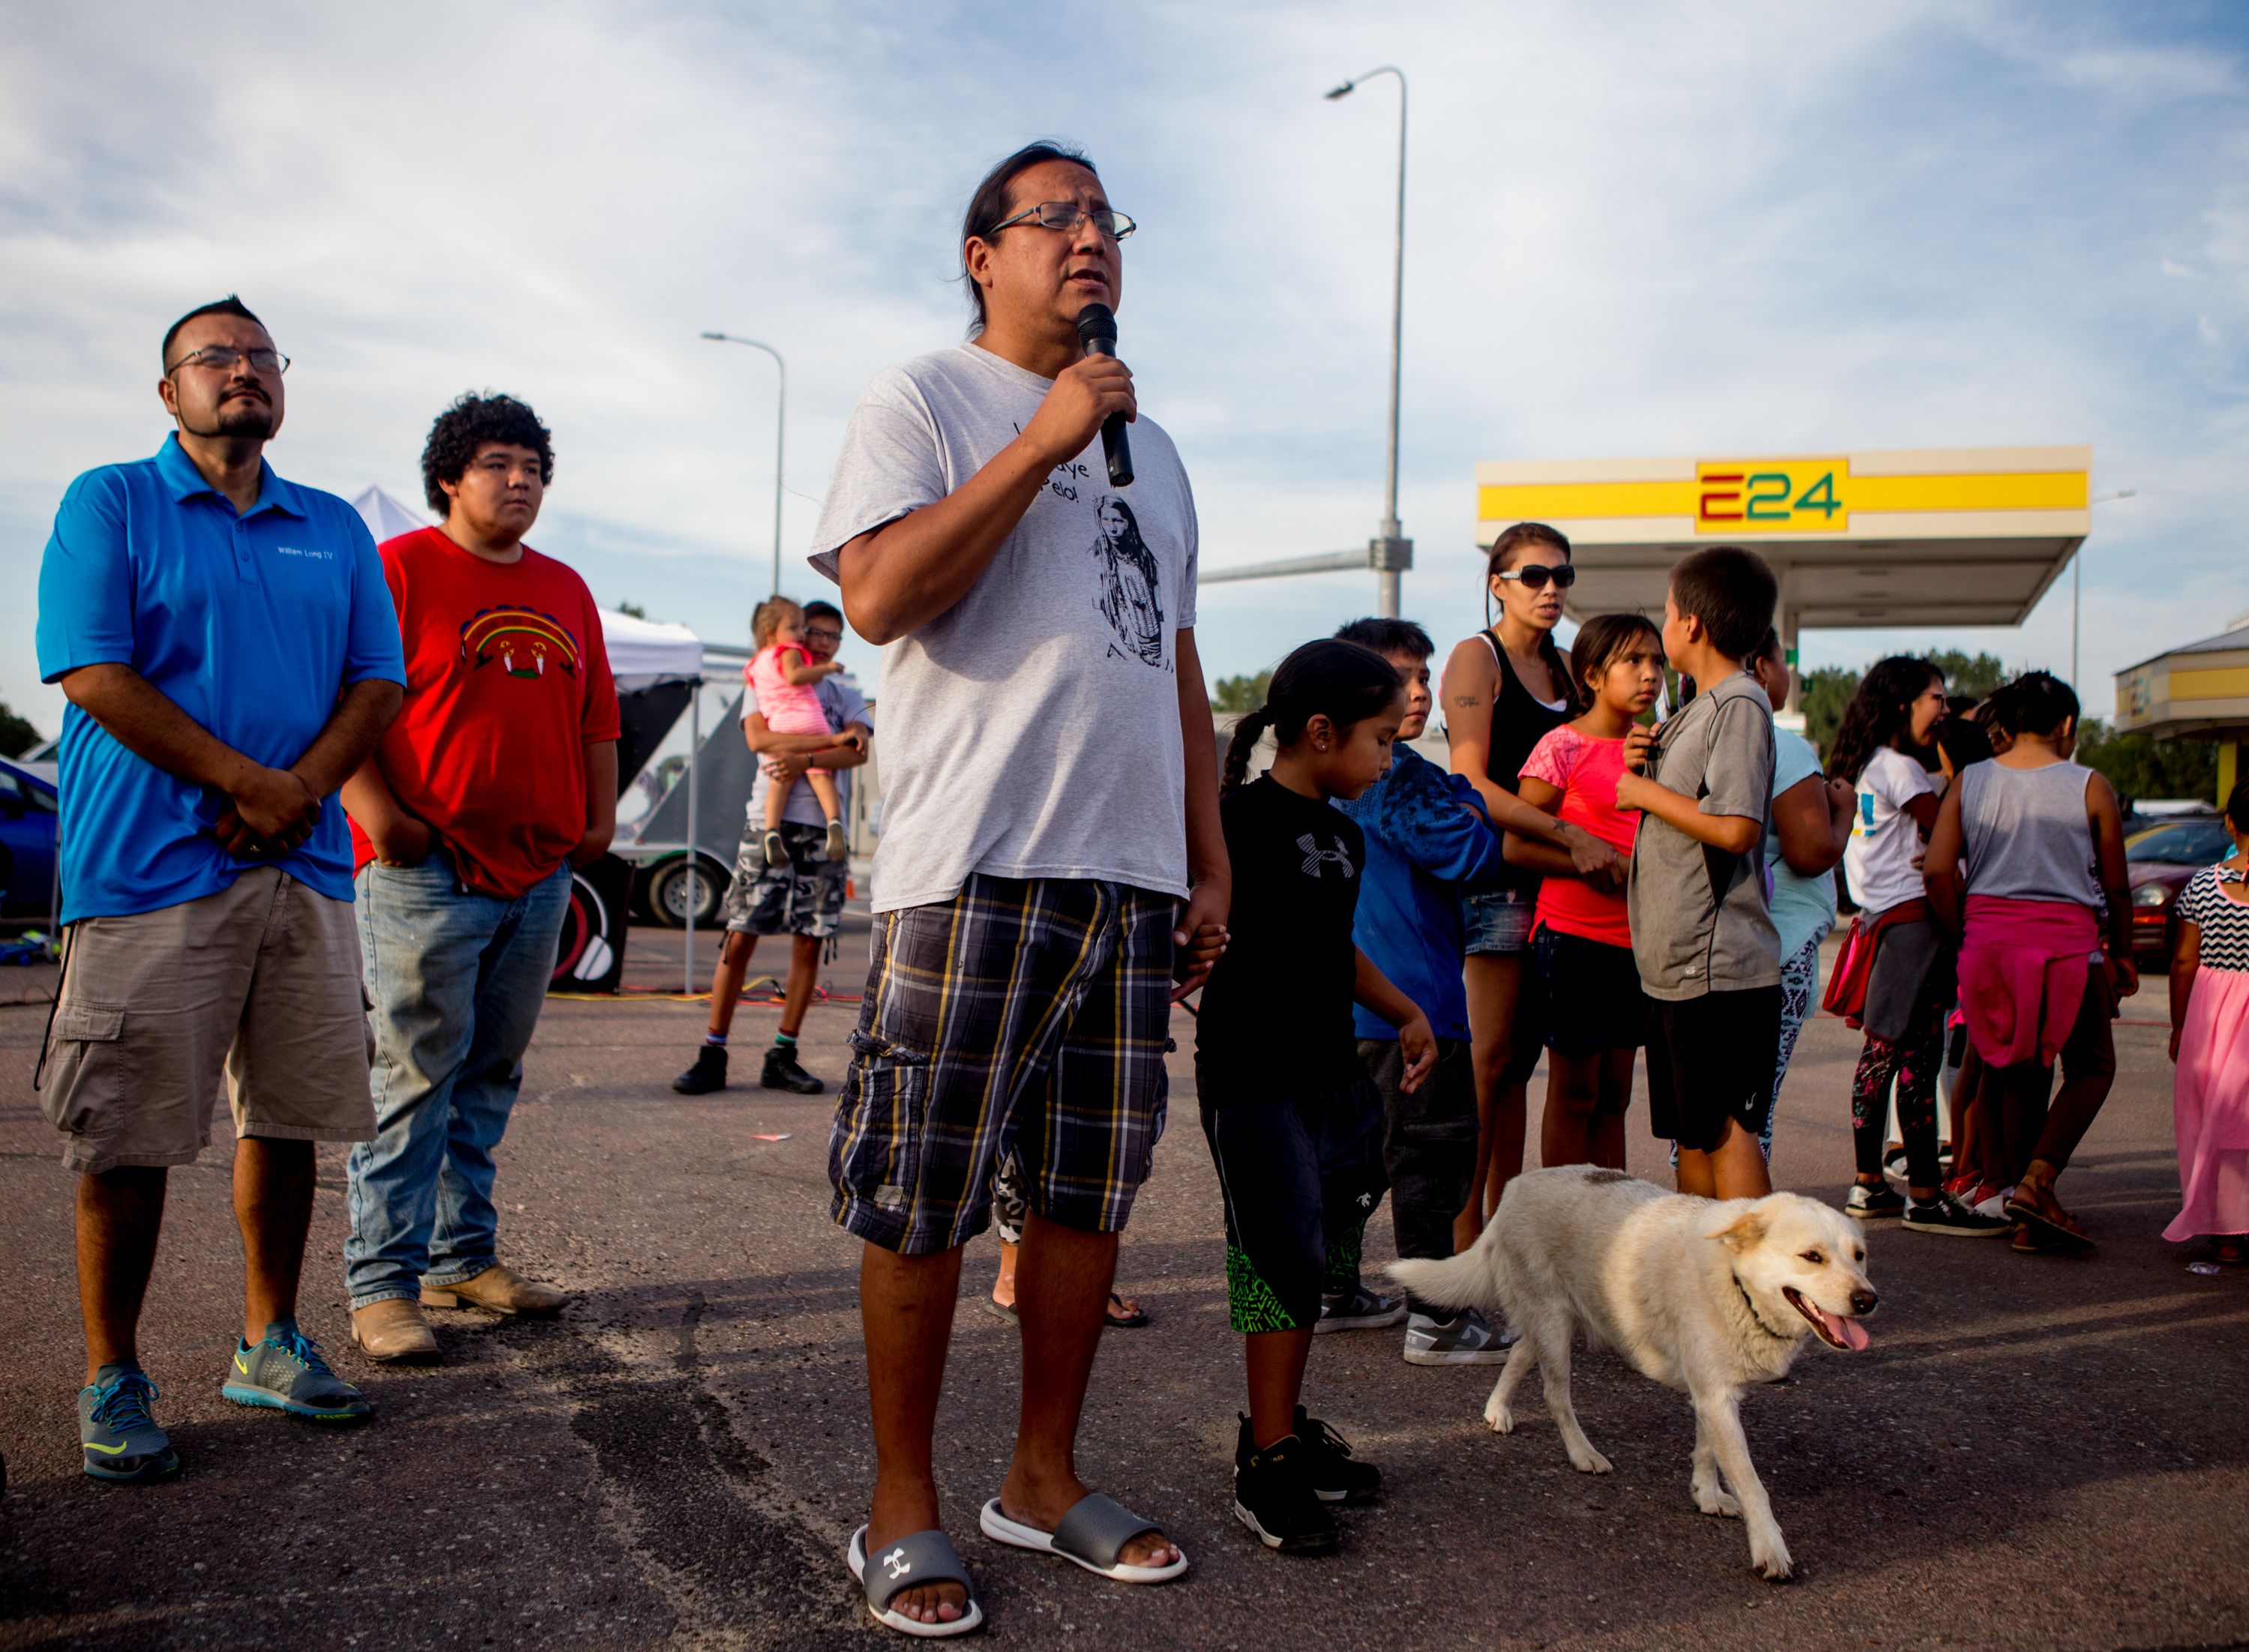 Sage Fast Dog, of the Rosebud Indian Reservation, speaks a prayer on September 1, 2018, during the first annual Sicangu Youth Program "Back-to-School" block party in Mission, South Dakota. Image by Brian Munoz. South Dakota, 2018.